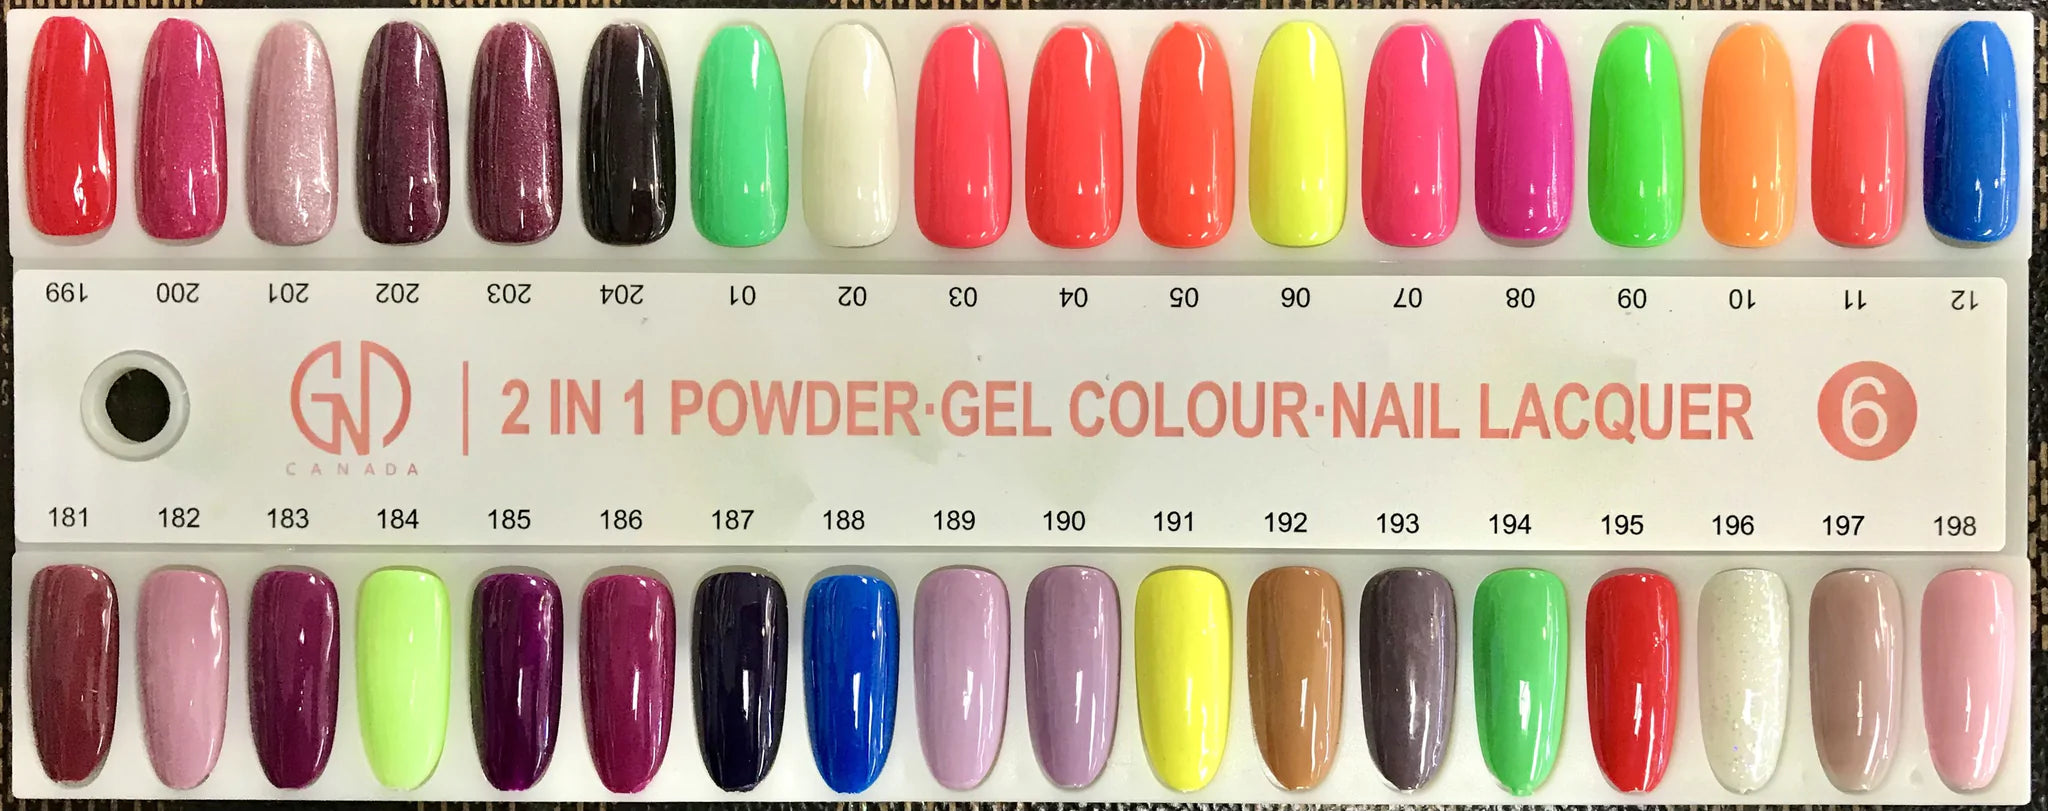 GND Duo Gel & Lacquer 184